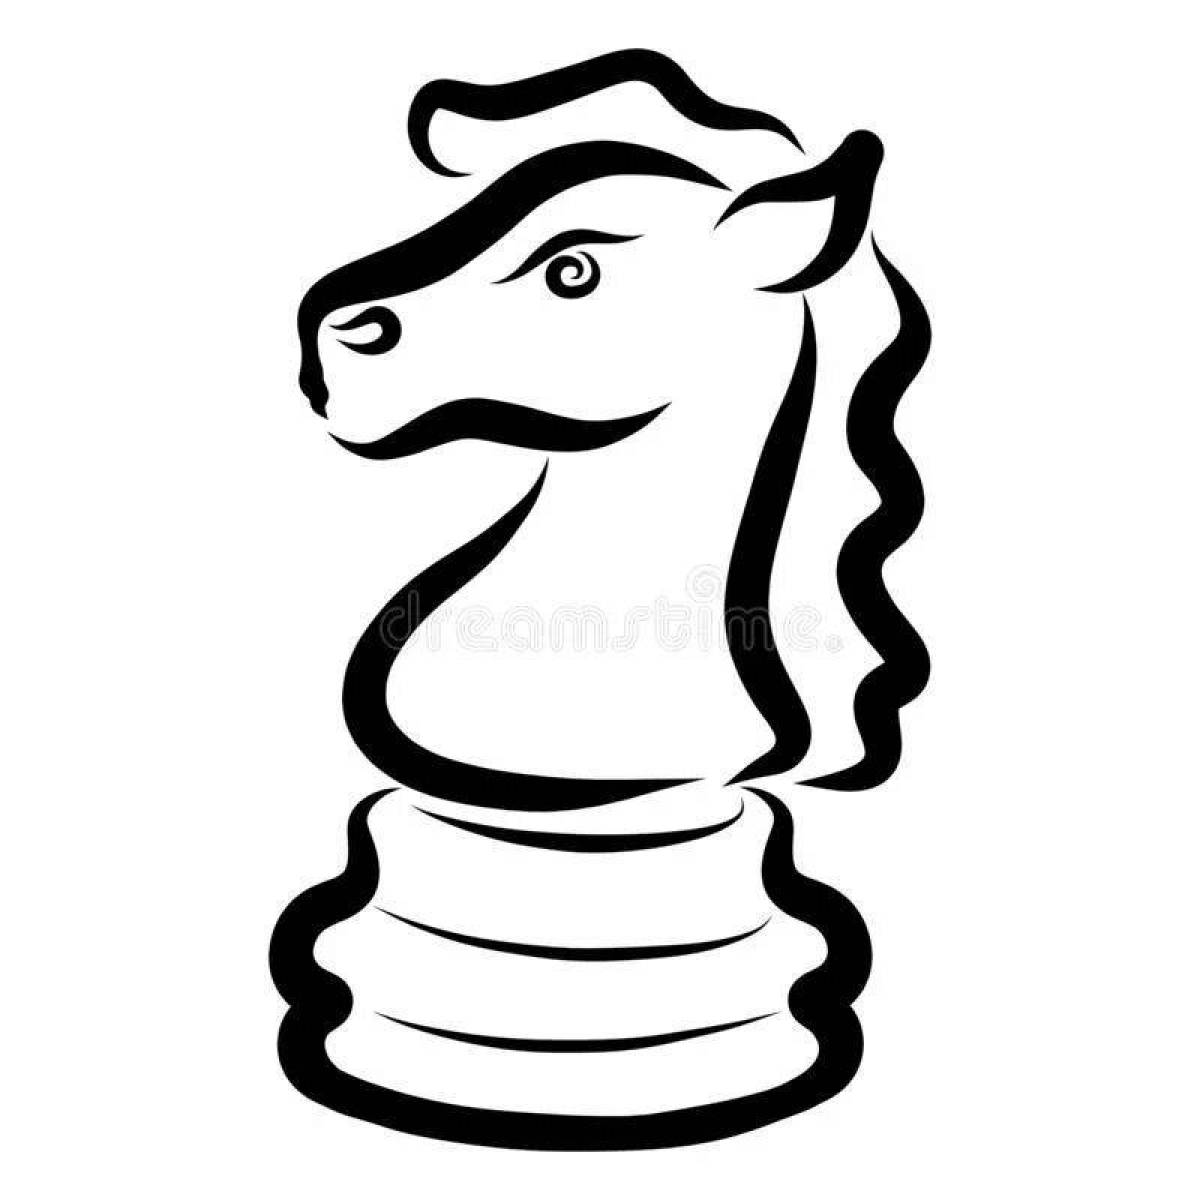 Royal chess knight coloring page